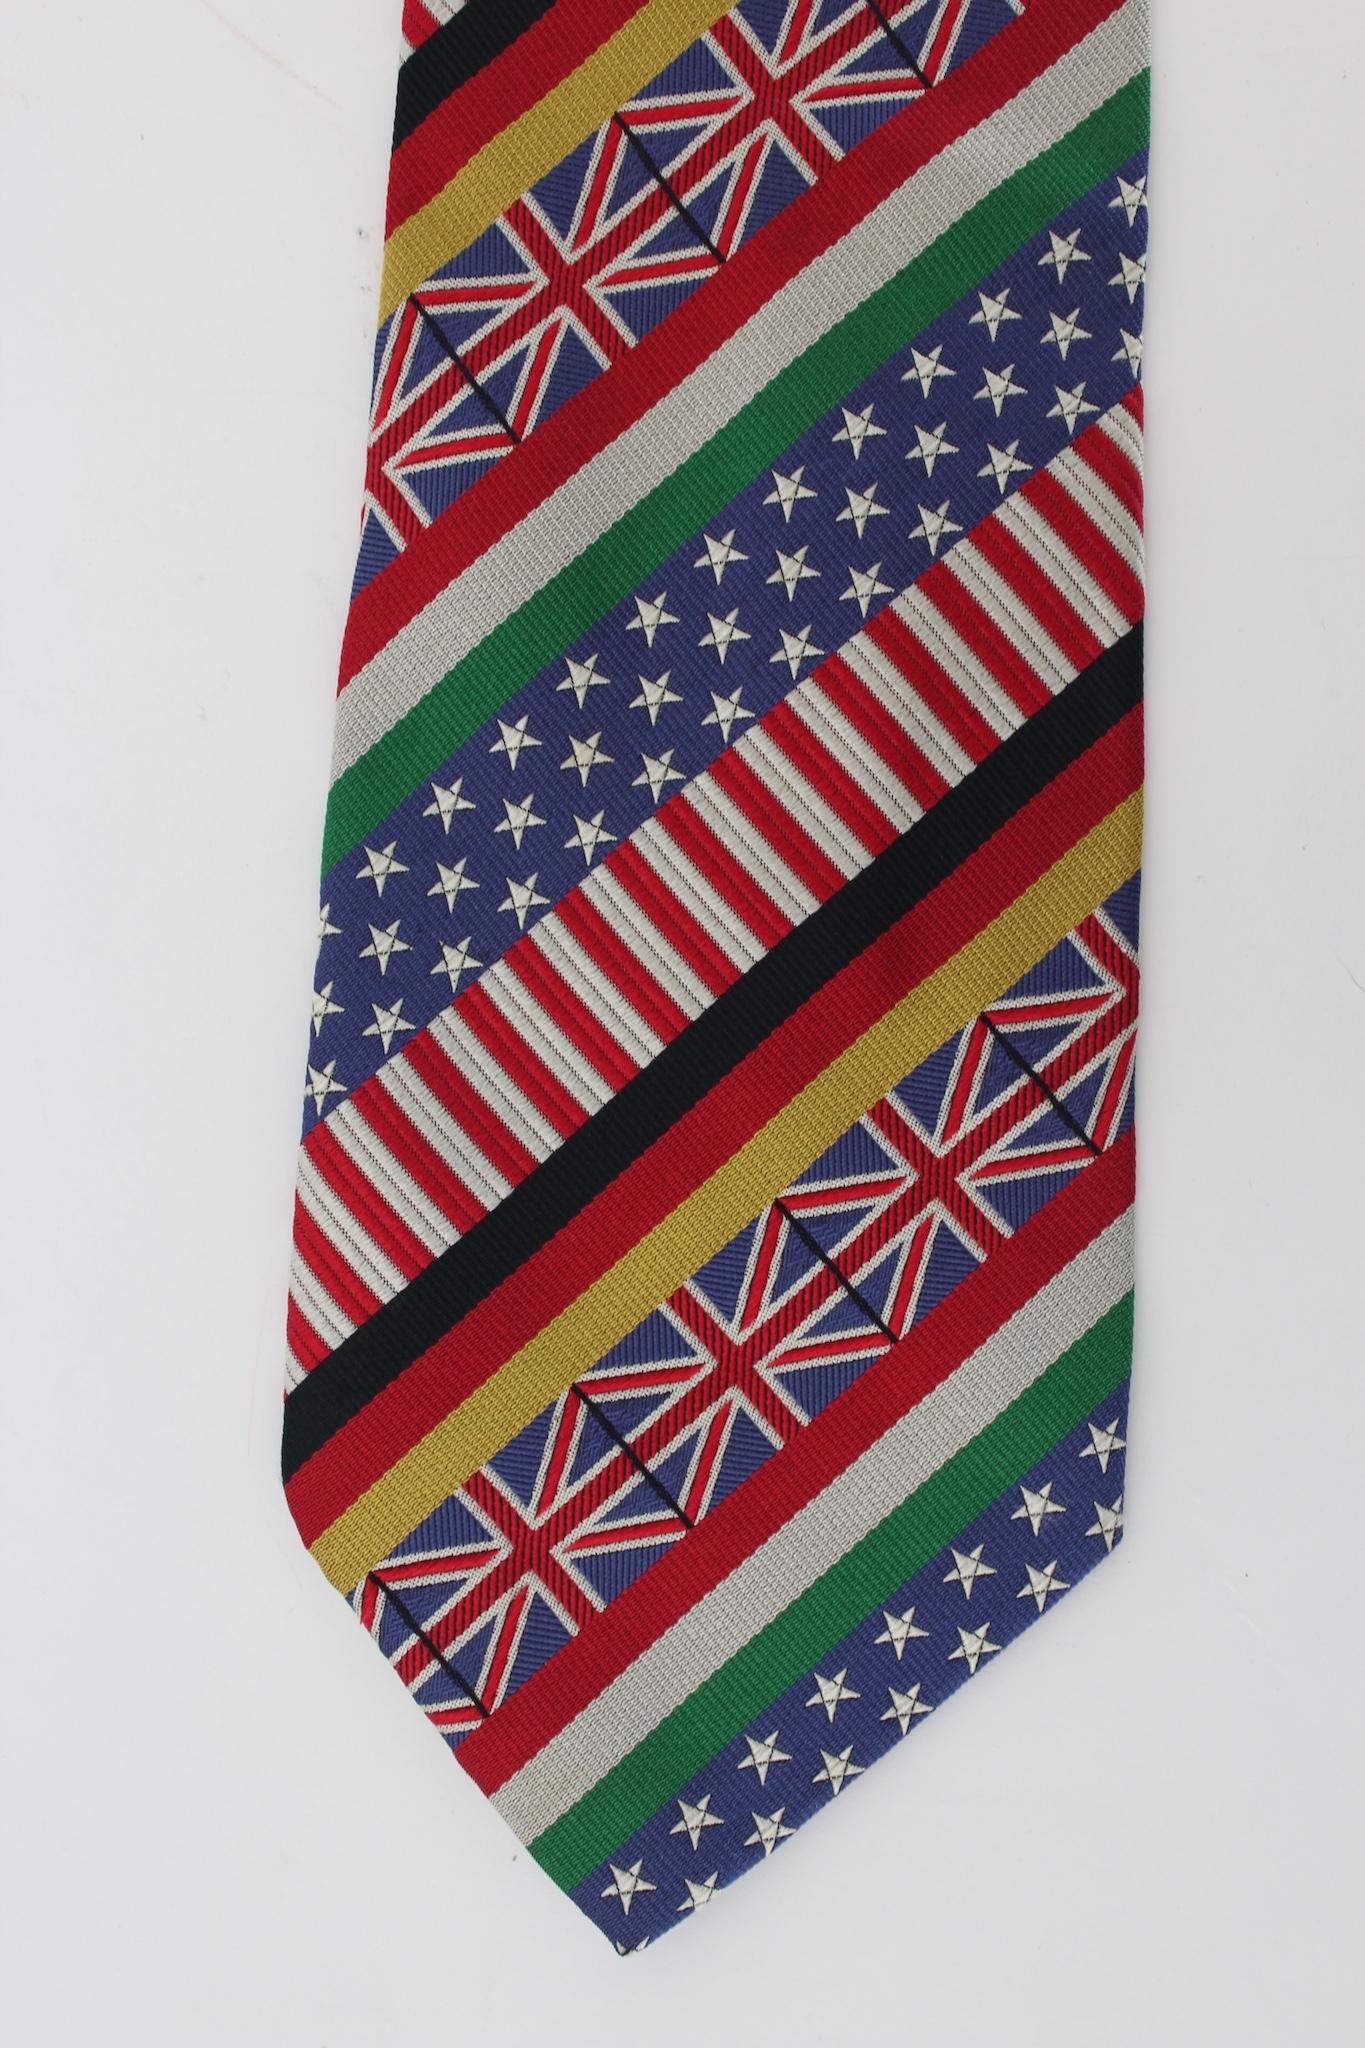 Moschino iconic vintage 90s tie. Multicolored with various flags designed, 100% silk fabric. Made in Italy.

Length: 145 cm
Width: 10 cm